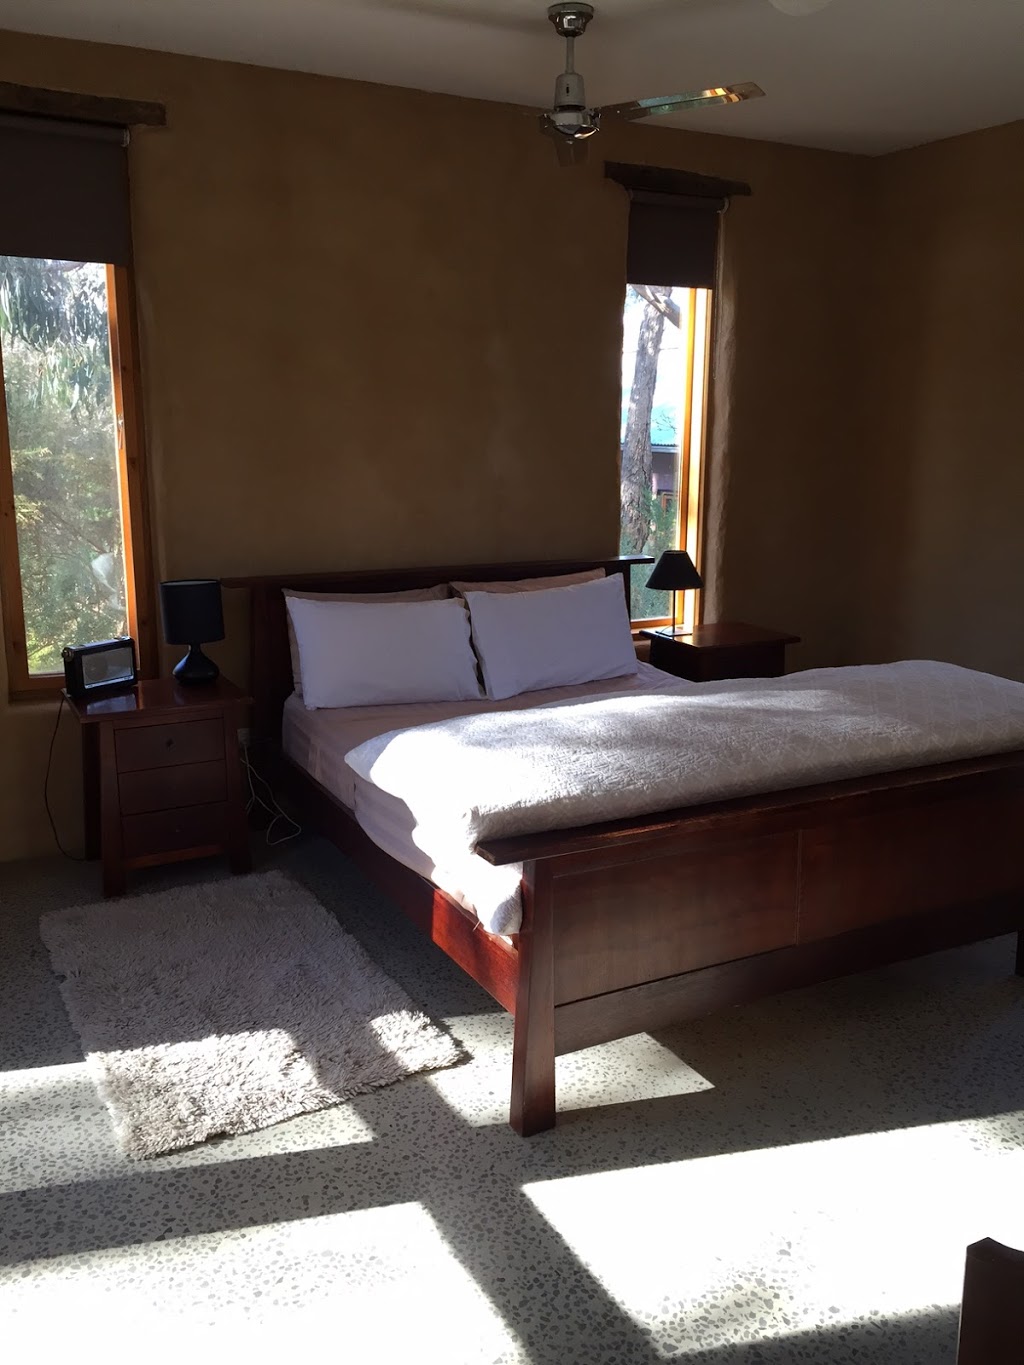 The Mud House | lodging | 80 Willy Milly Rd, Castlemaine VIC 3450, Australia | 0419115486 OR +61 419 115 486